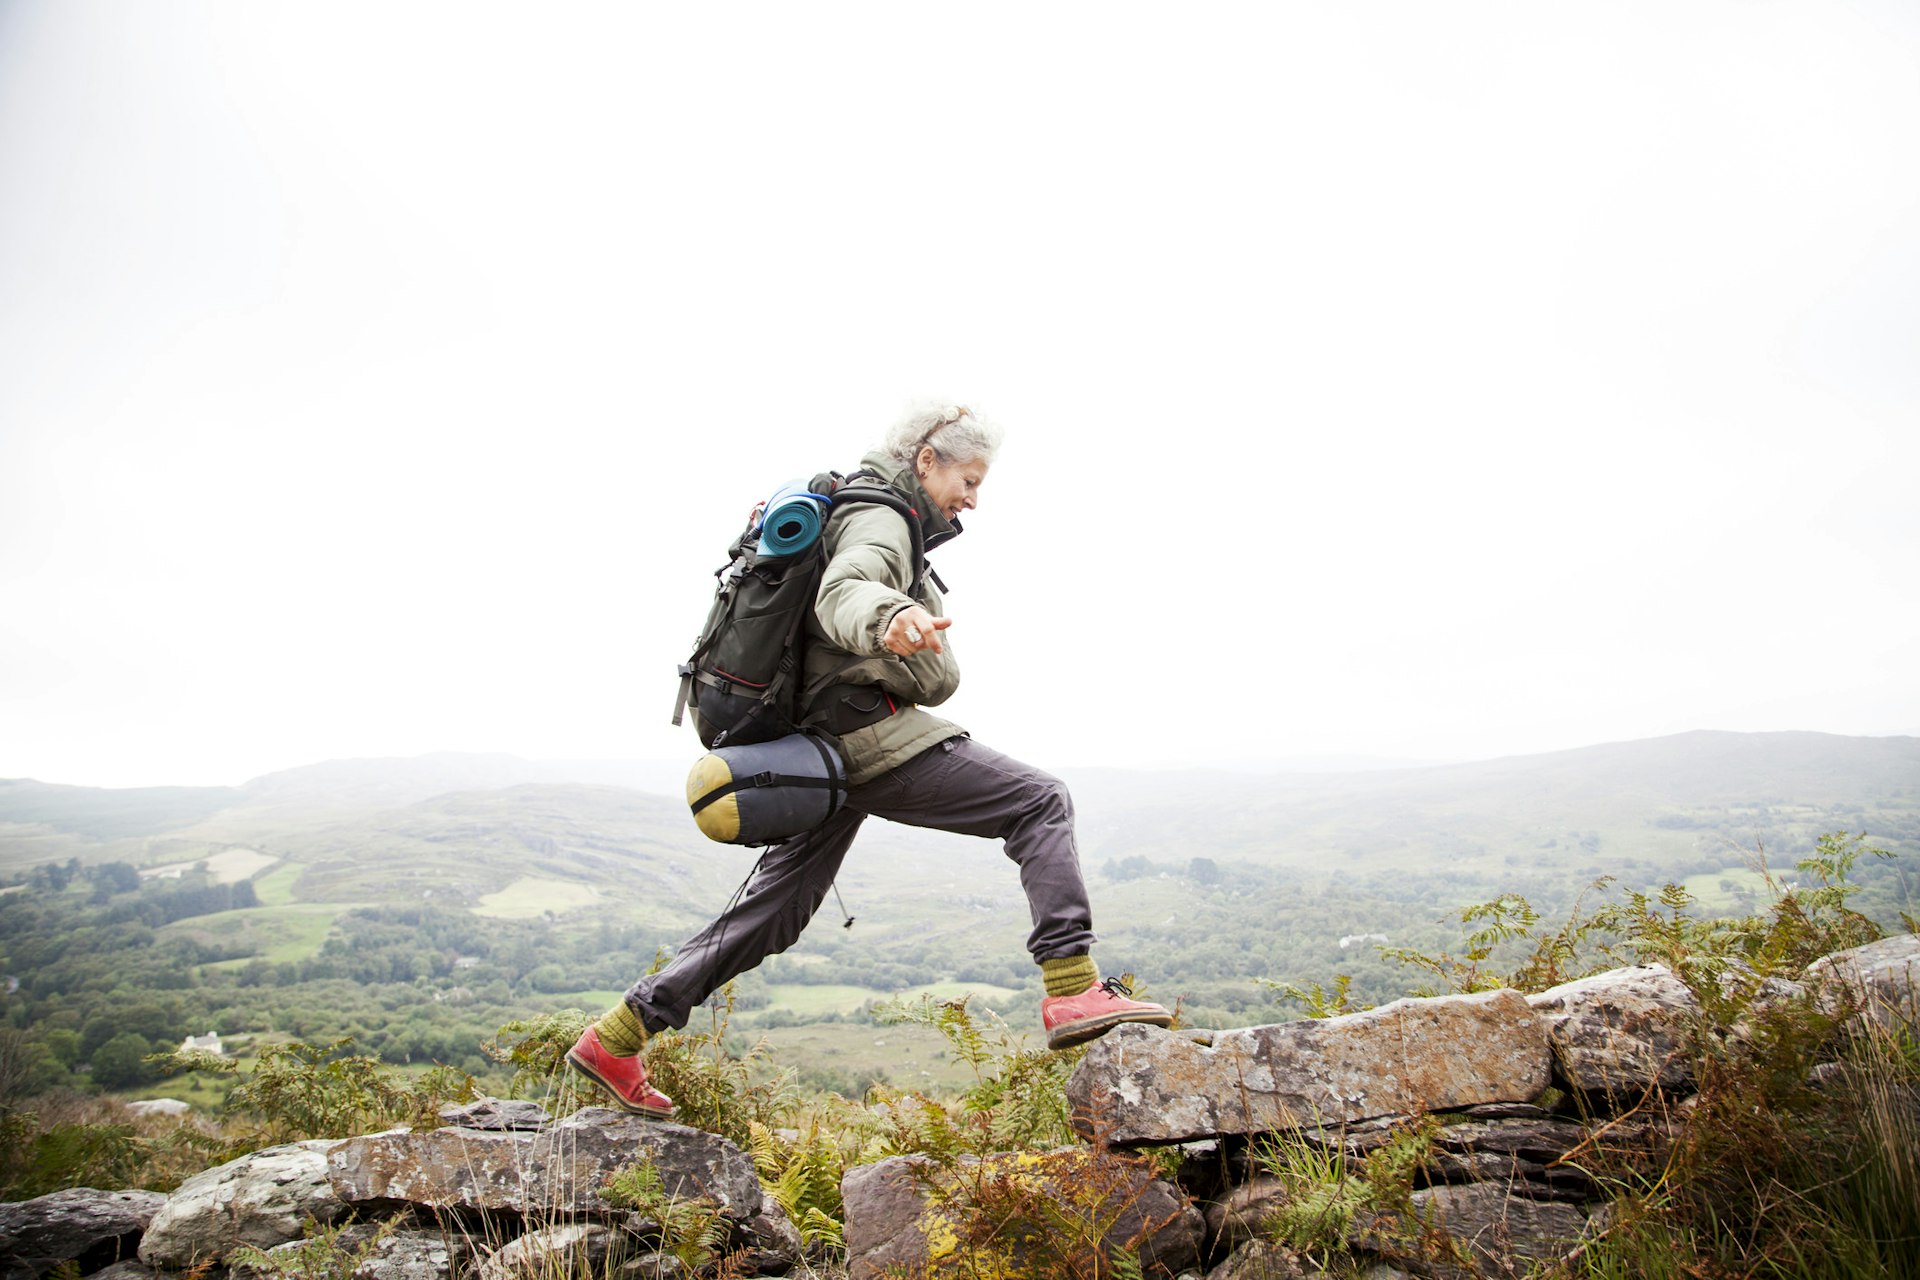 An older woman jumps across rocks in the mountains of Ireland